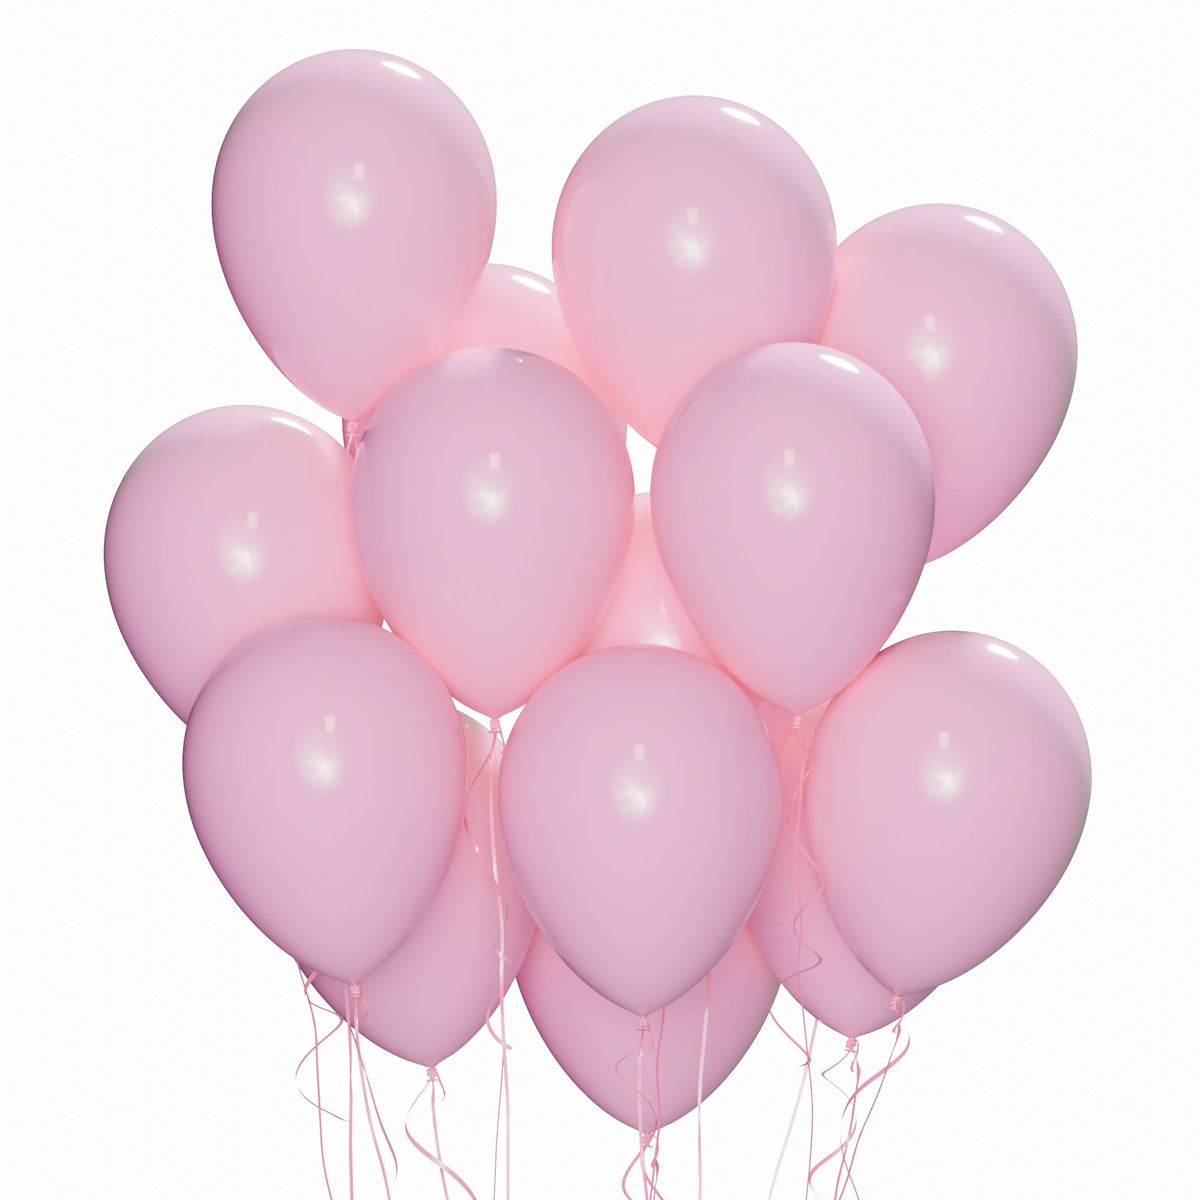 WIDE OCEAN INTERNATIONAL TRADE BEIJING CO., LTD Balloons Pink Latex Balloon 12 Inches, Macaroon Collection, 72 Count 810064198977